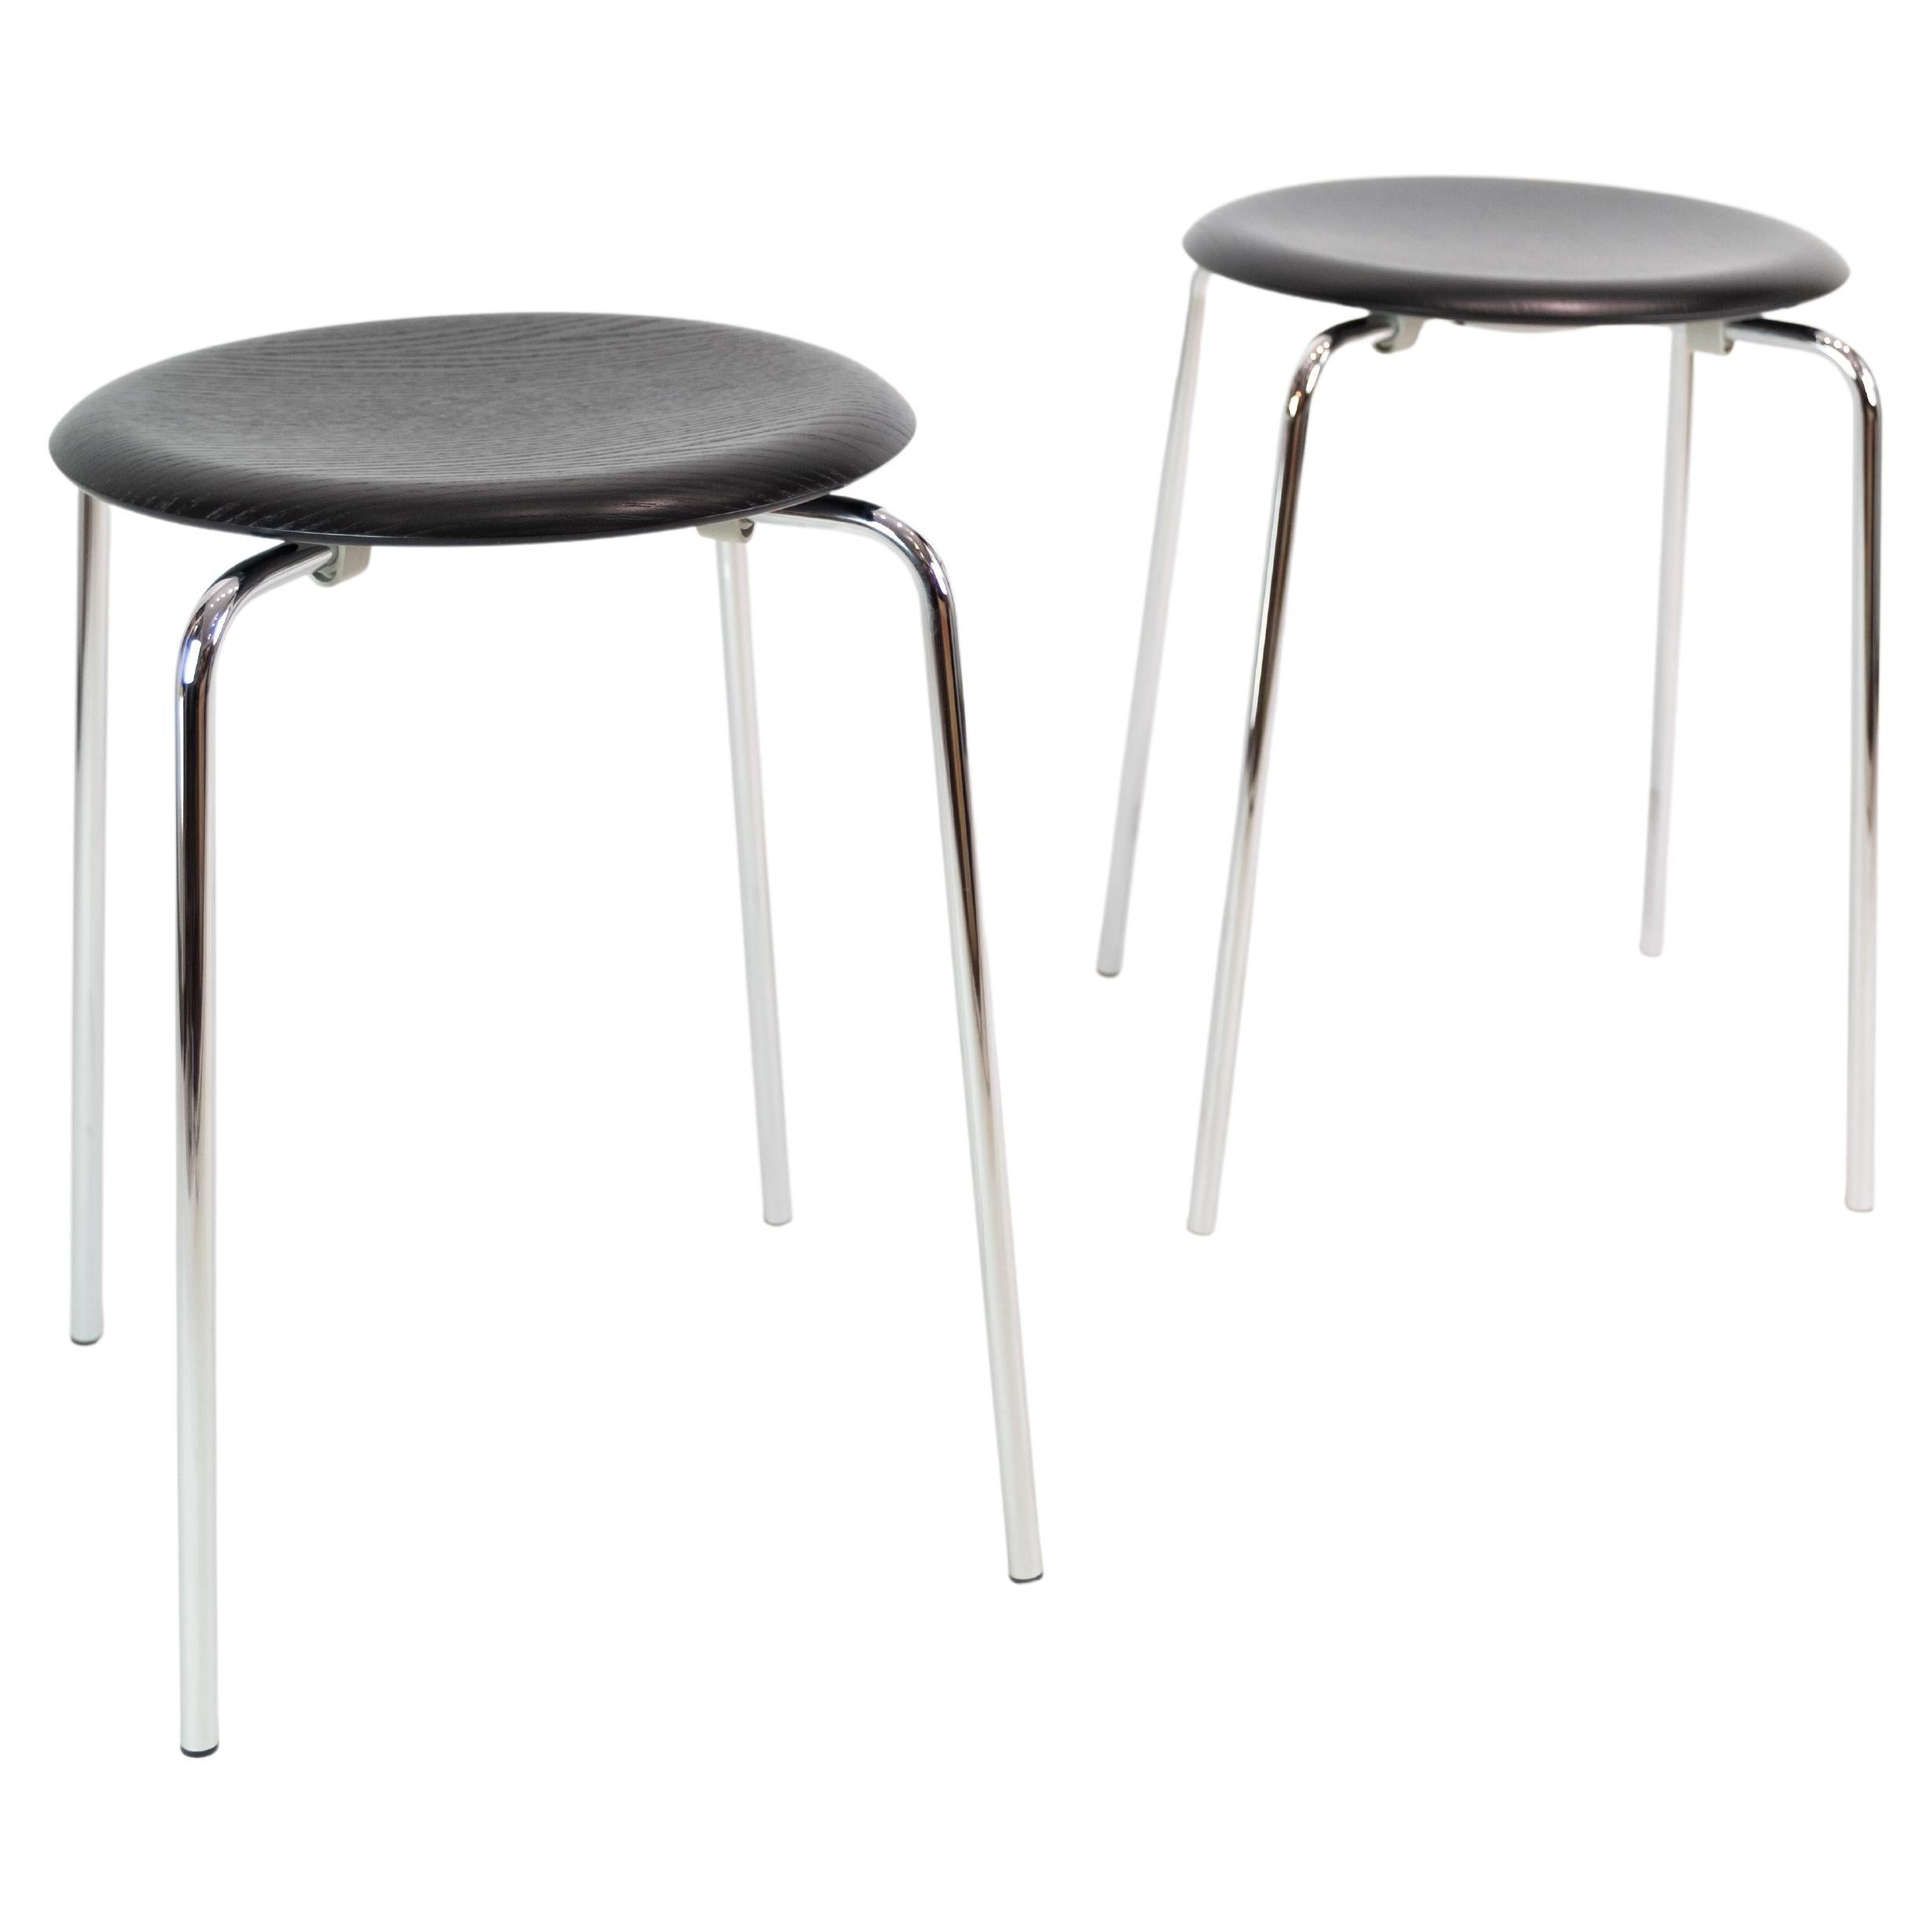 Black Ash Dot Footstools by Arne Jacobsen Produced by Fritz Hansen 